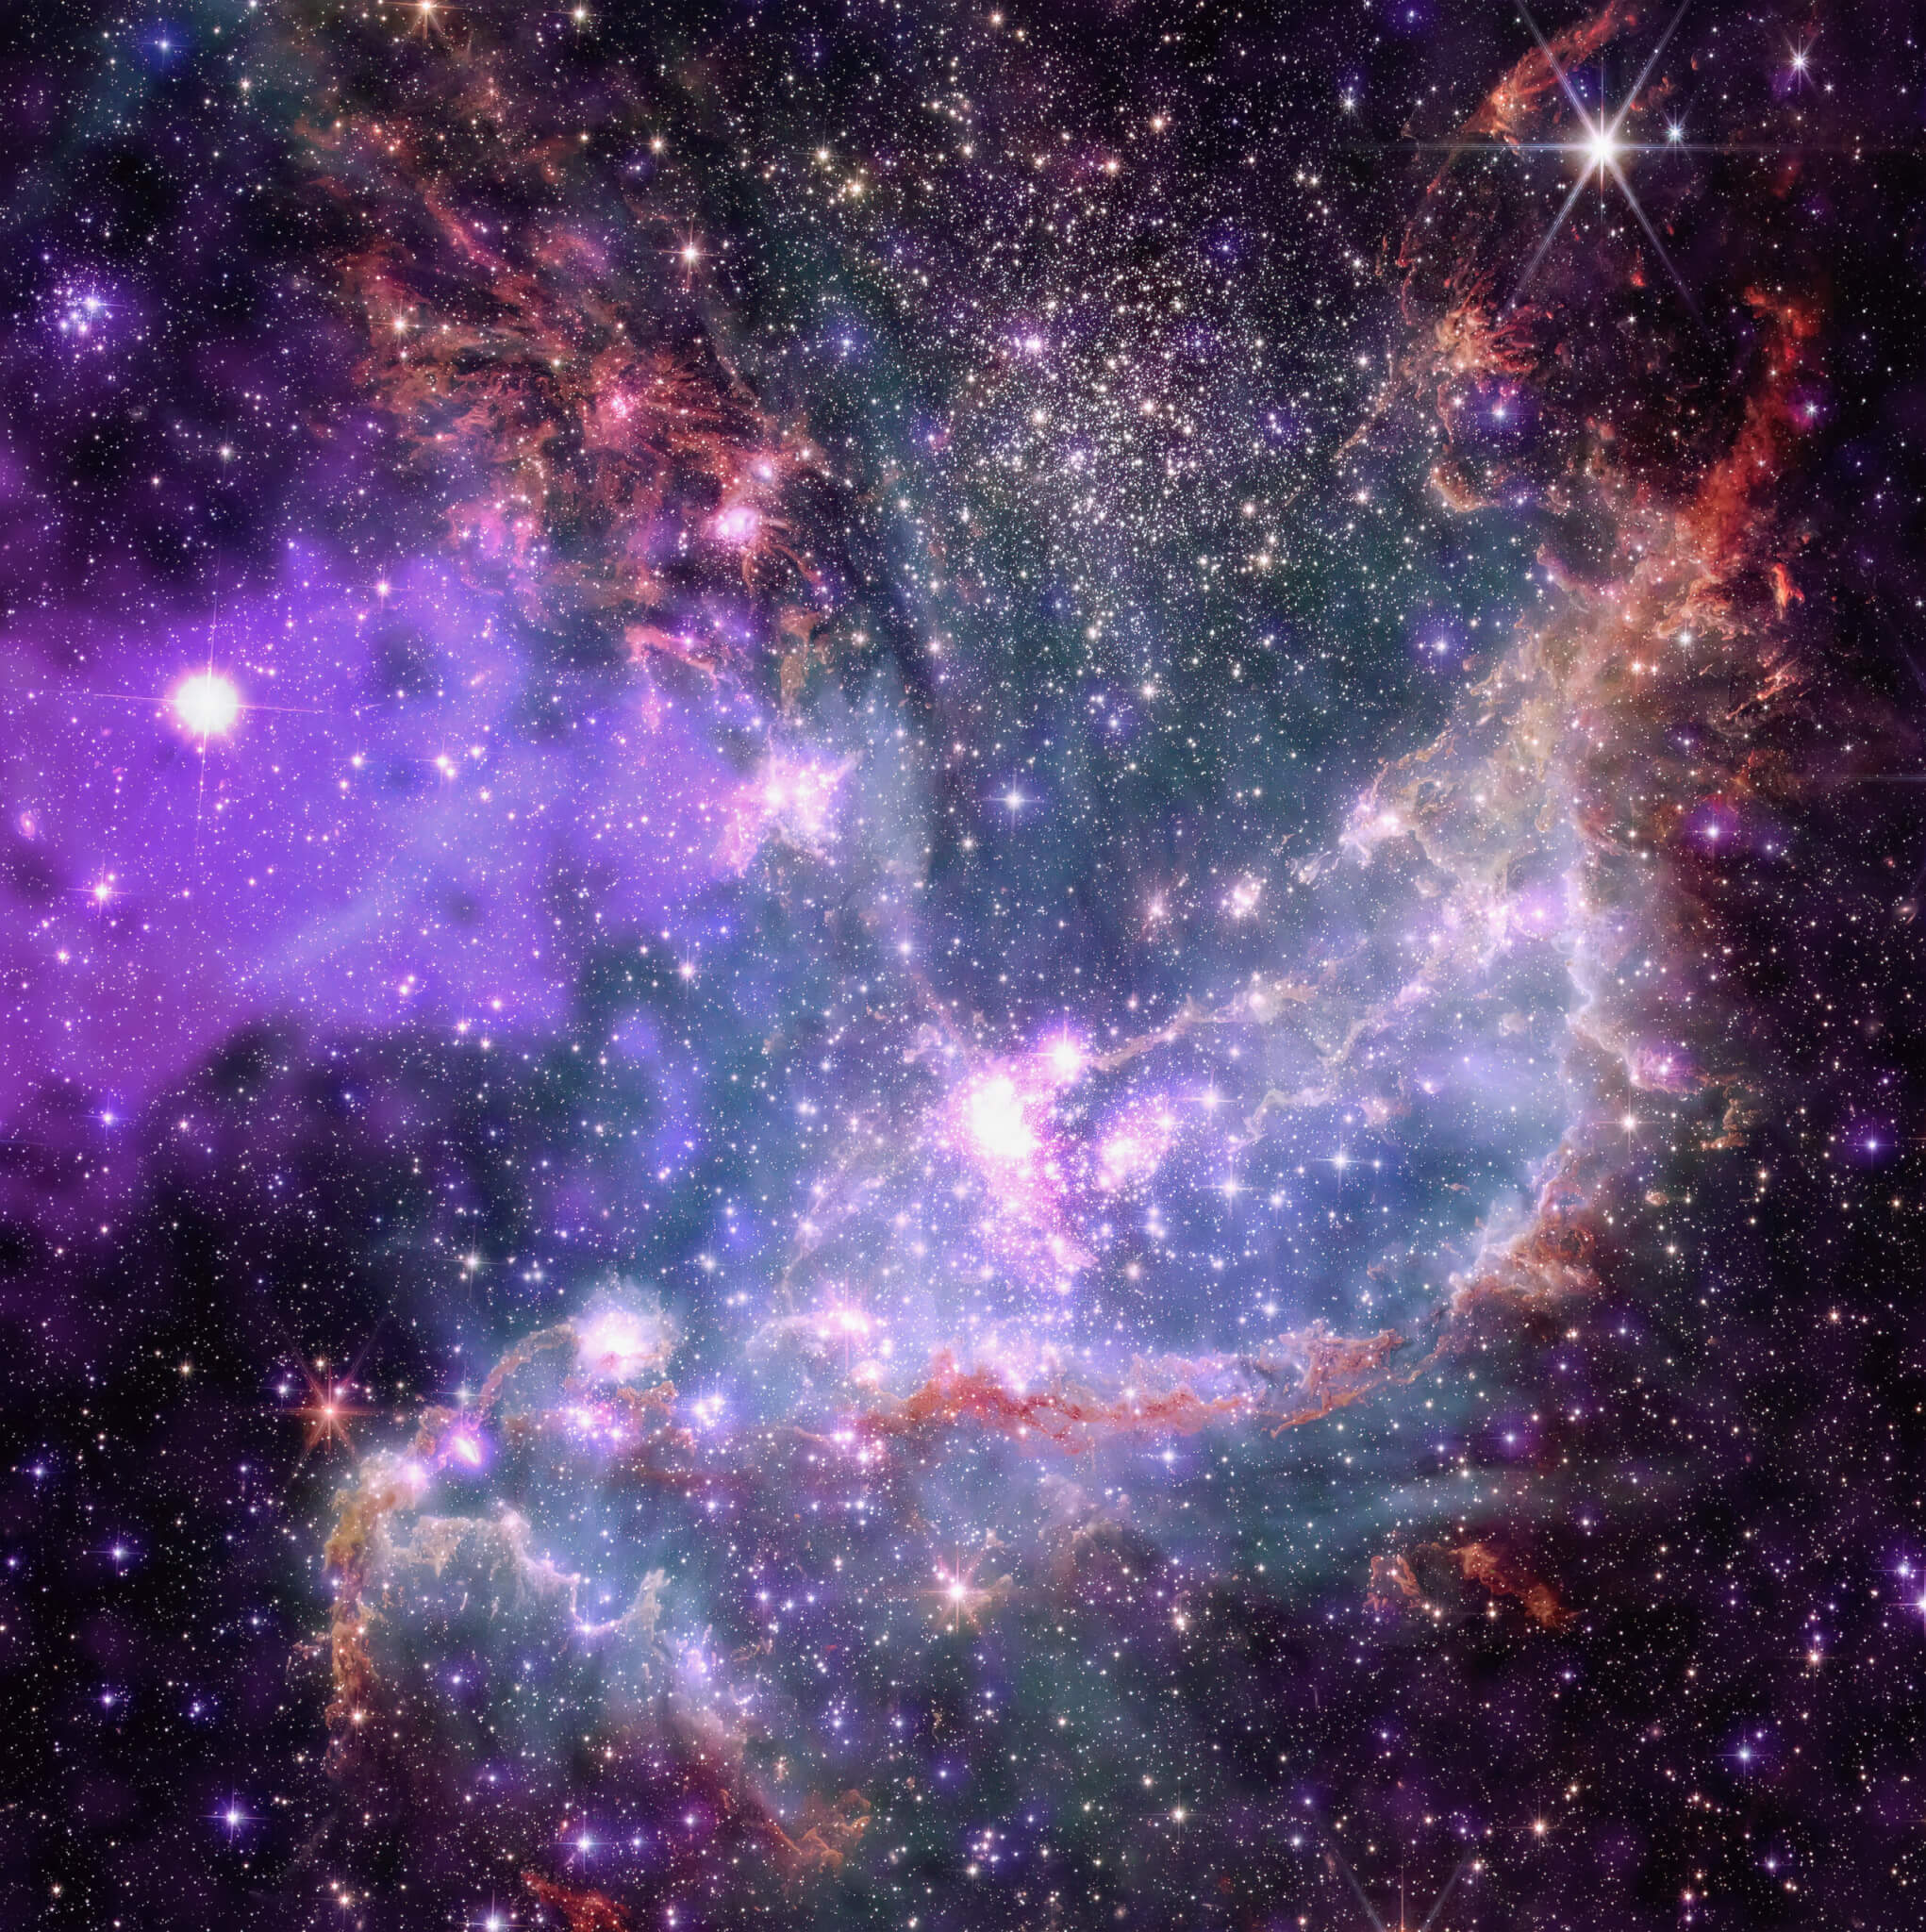 Image of star cluster NGC 346